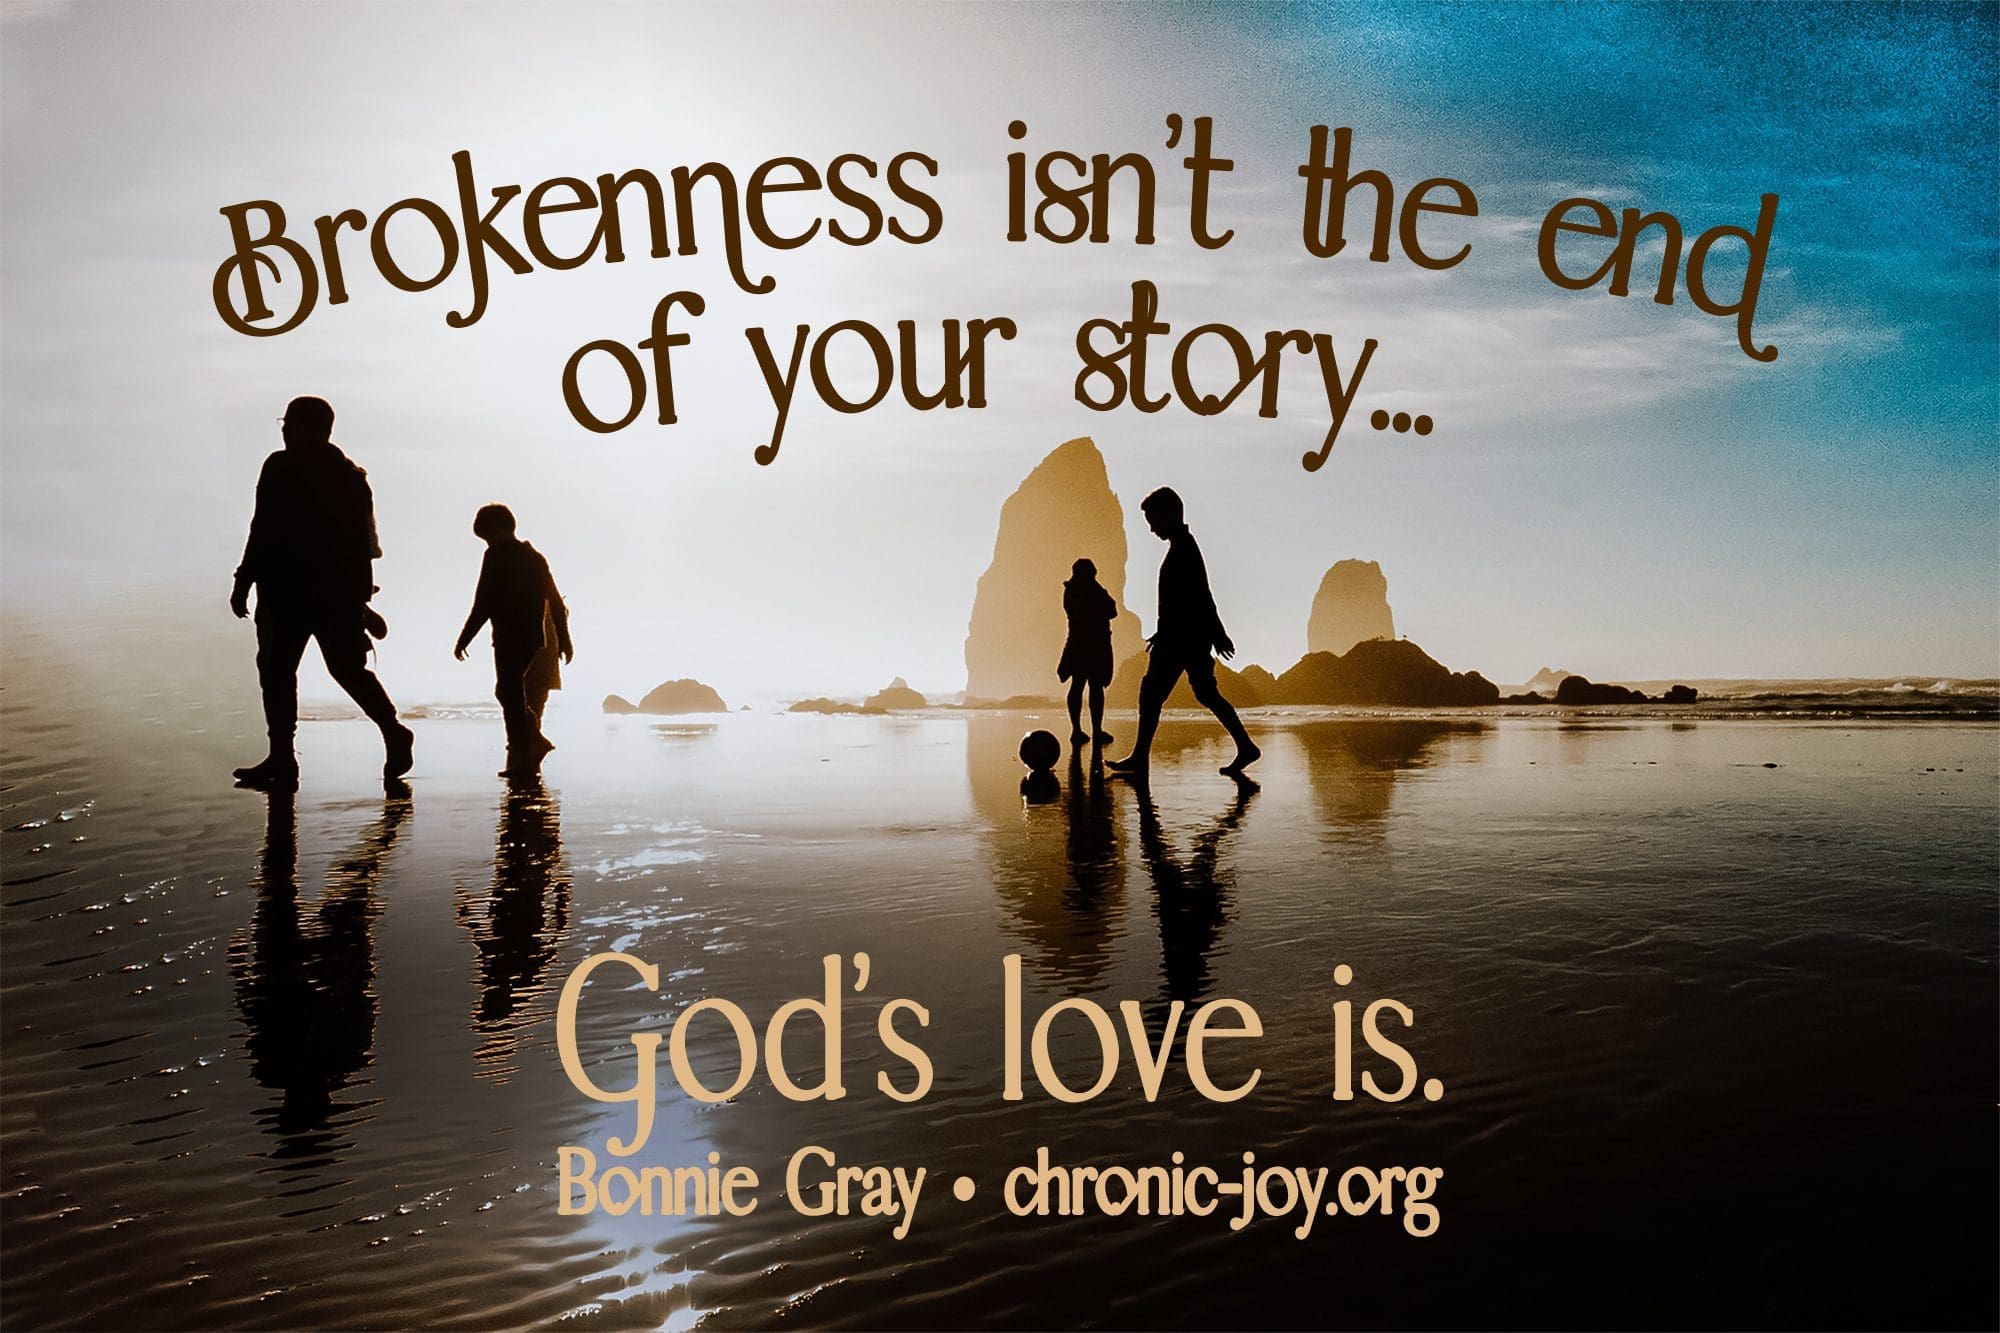 "Brokenness isn't the end of your story, God's love is." Bonnie Gray